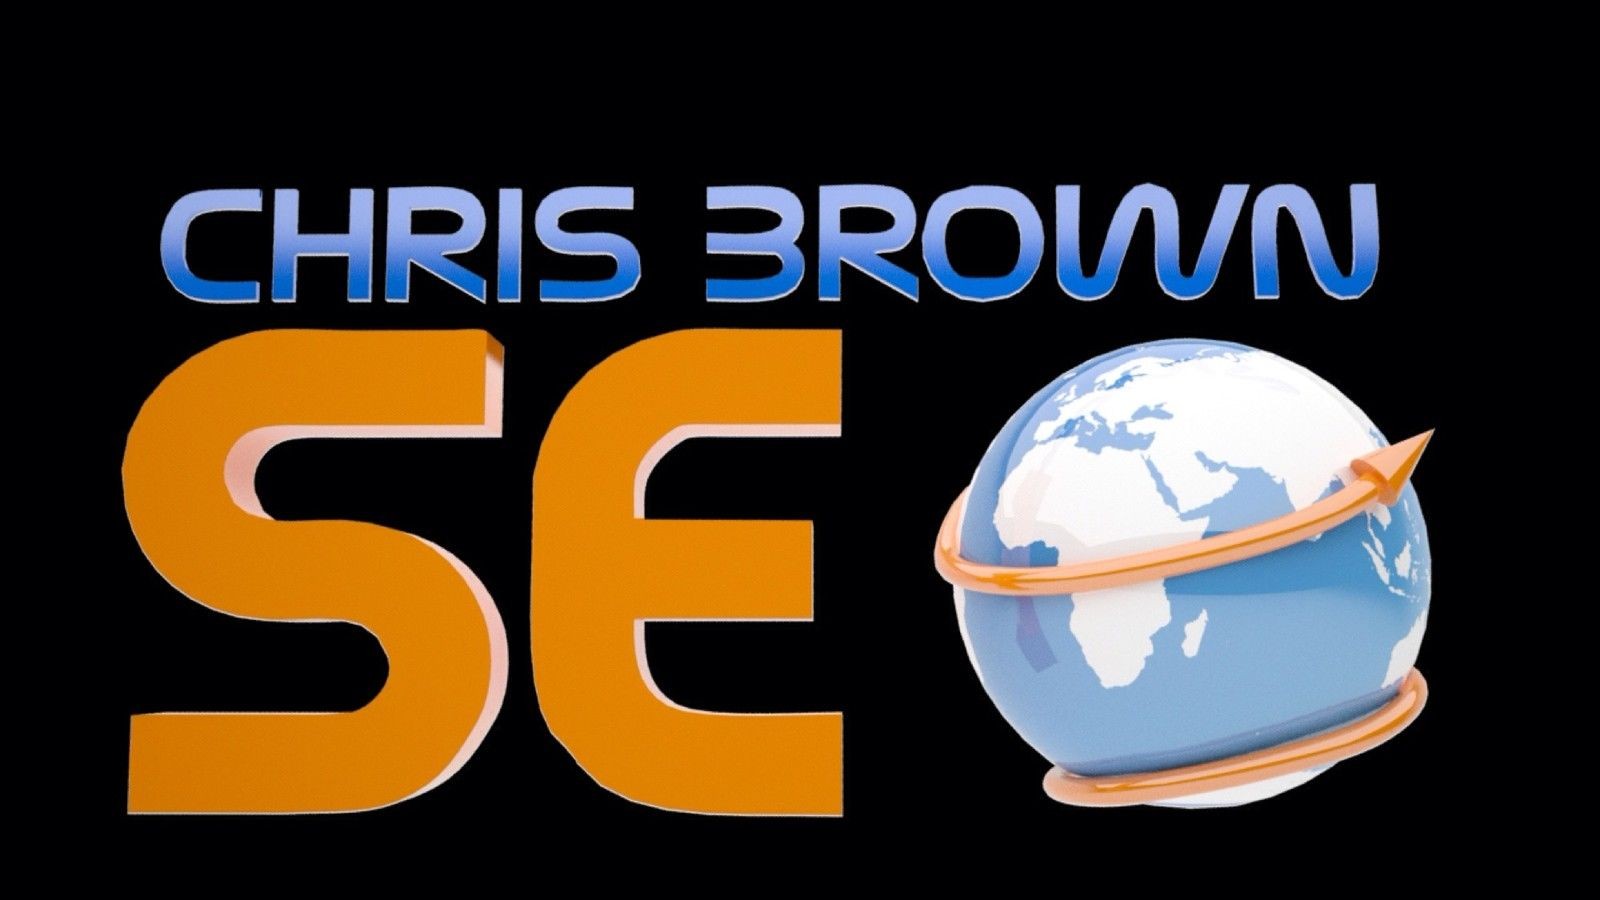 ★ChrisBrownWheel Exclusive SEO-Need better rankings in Google ? We can Help Now!